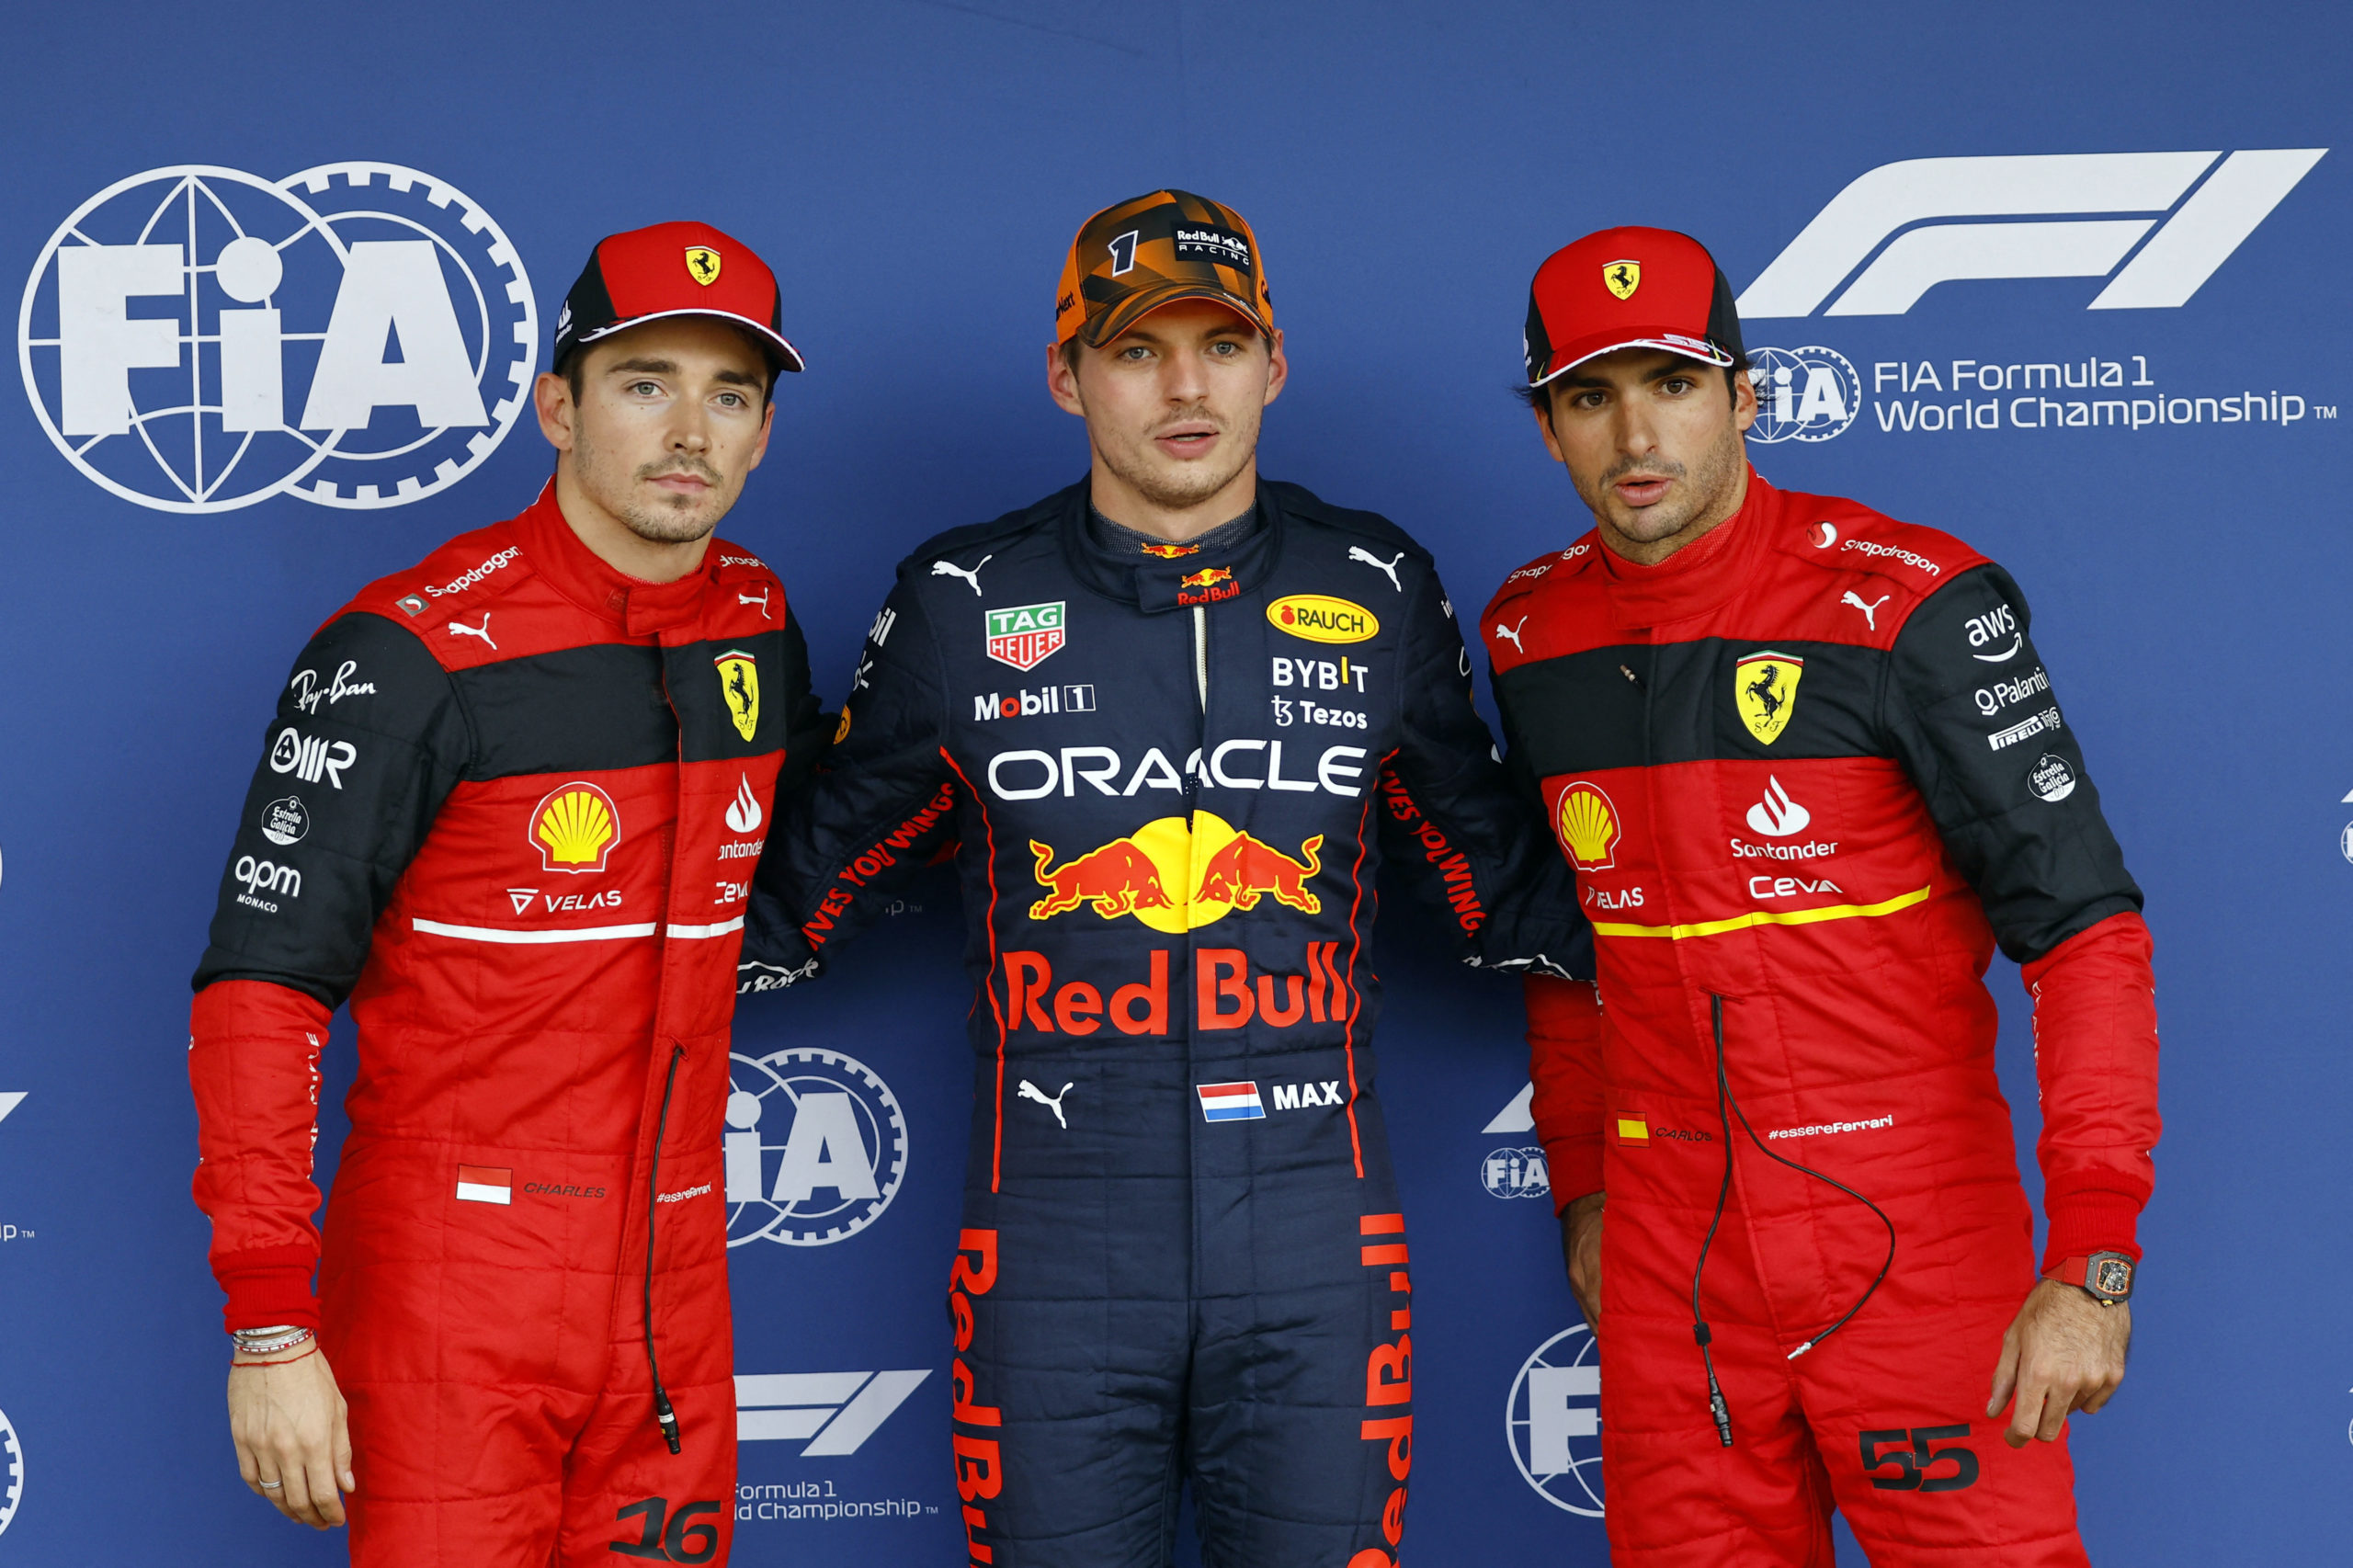 Formula One F1 - Japanese Grand Prix - Suzuka Circuit, Suzuka, Japan - October 8, 2022 Red Bull's Max Verstappen poses as he celebrates qualifying in pole position with second placed Ferrari's Charles Leclerc and third placed Ferrari's Carlos Sainz Jr. 